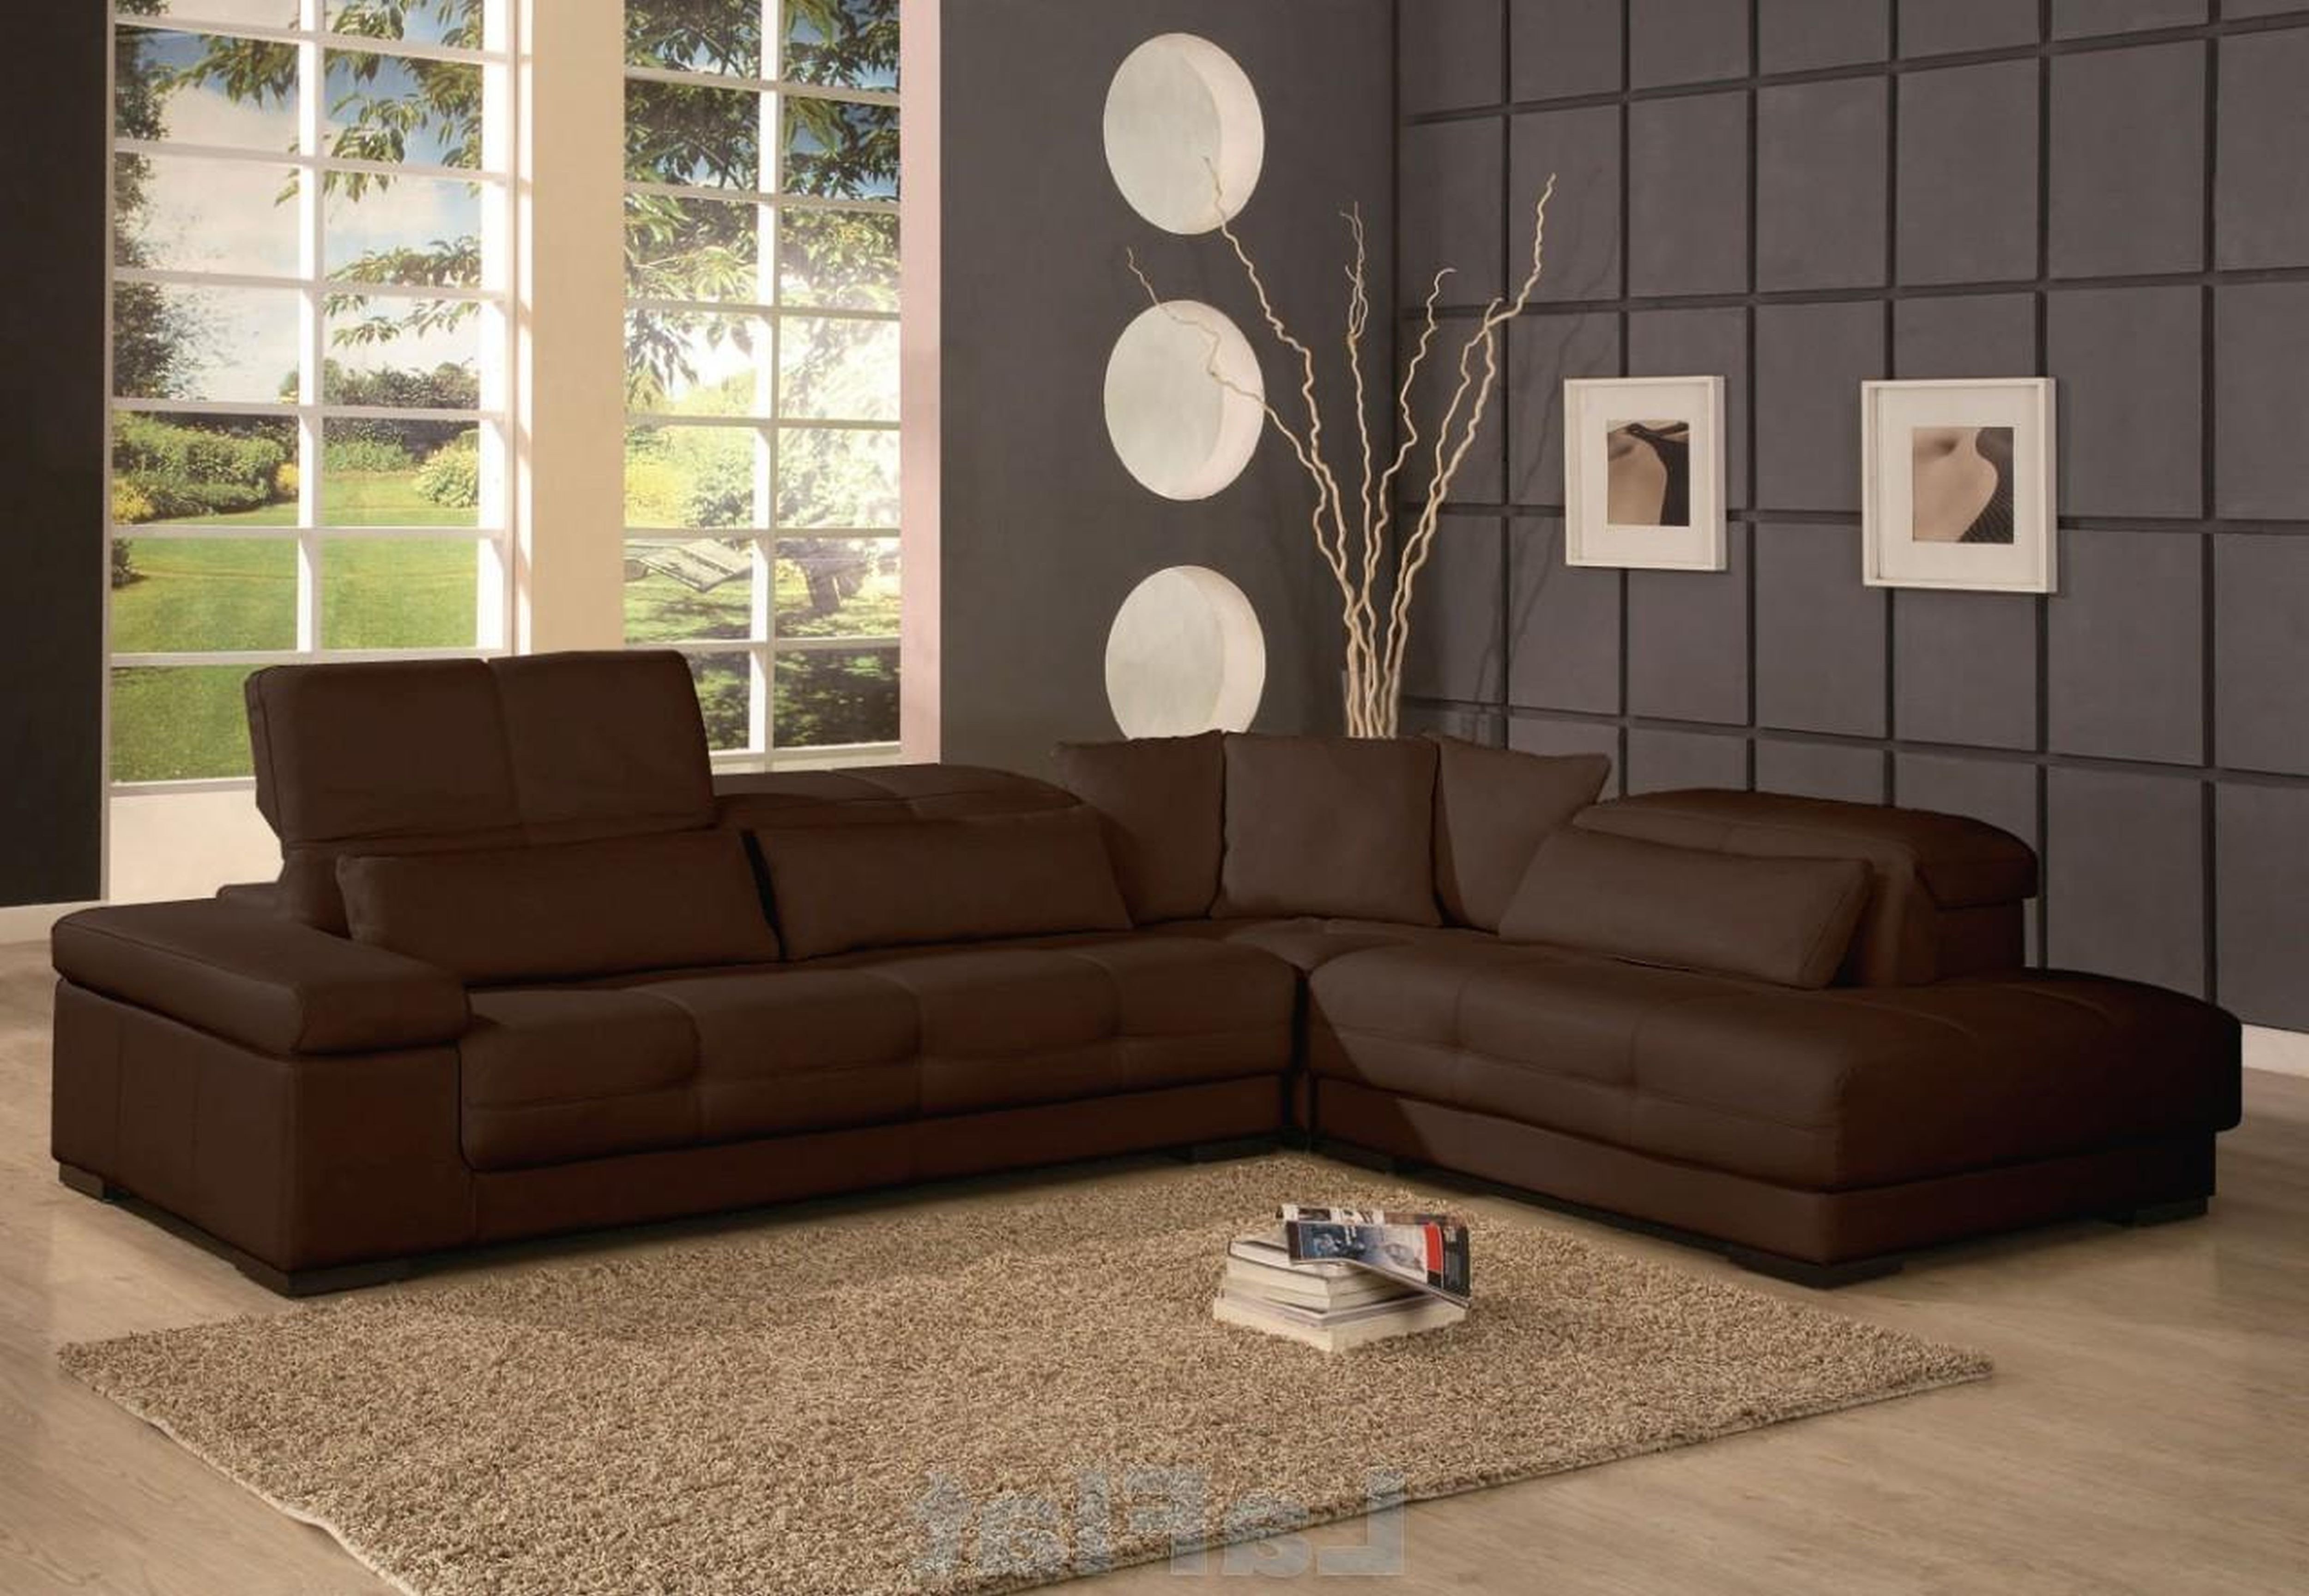 Modern Brown Living Room Decorating Ideas Cool Brown sofa Decorating Living Room Ideas